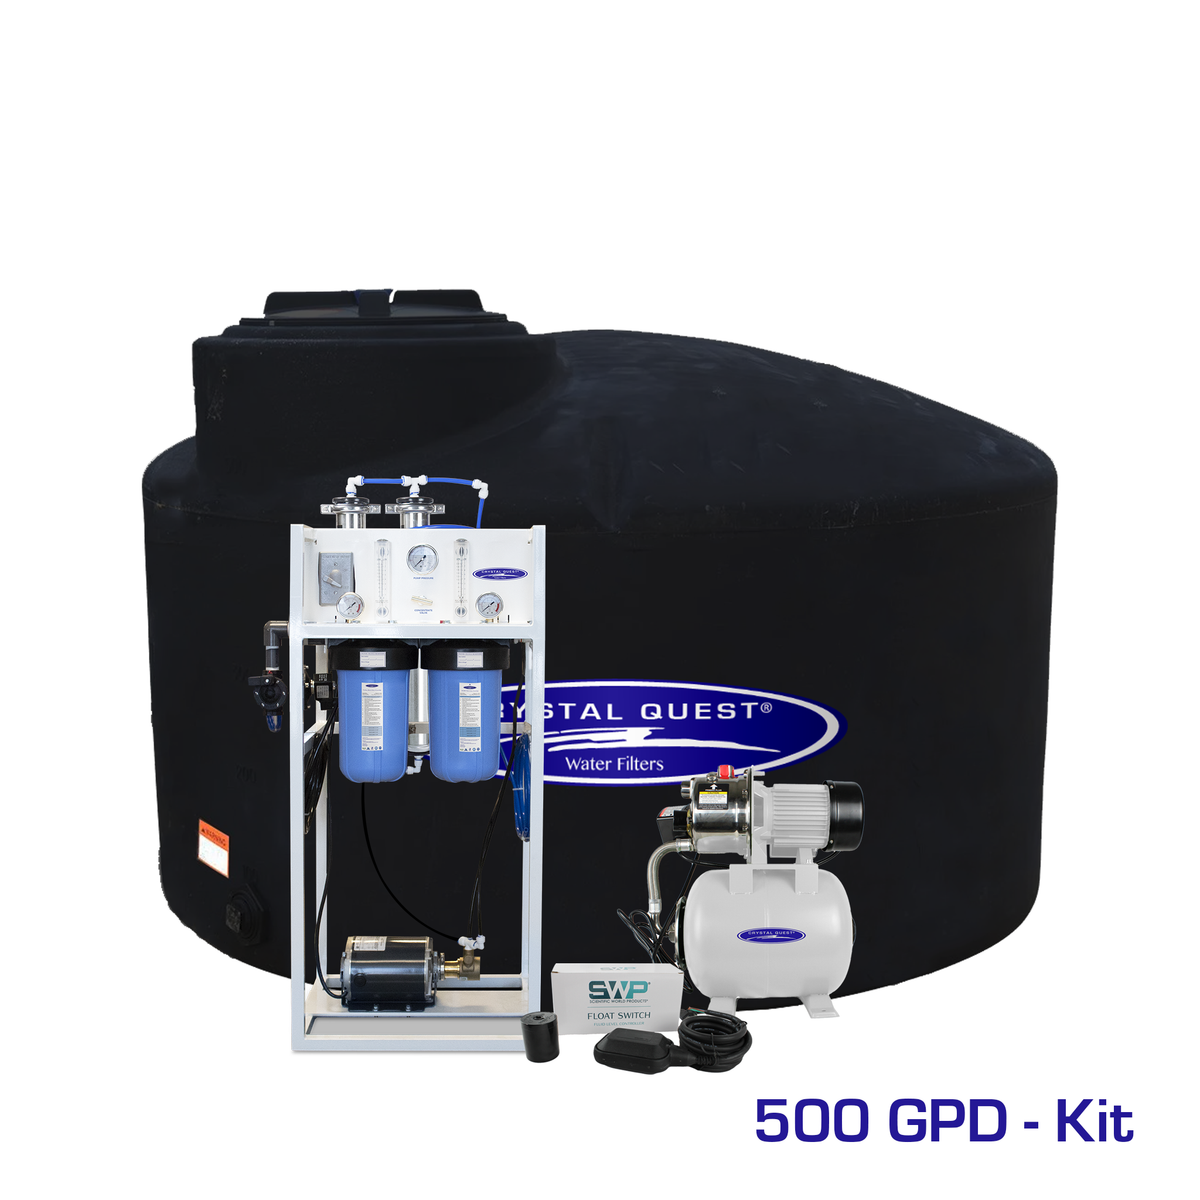 500 GPD / Add Storage Tank Kit (550 Gal) Commercial Mid-Flow Reverse Osmosis System (500-7000 GPD) - Commercial - Crystal Quest